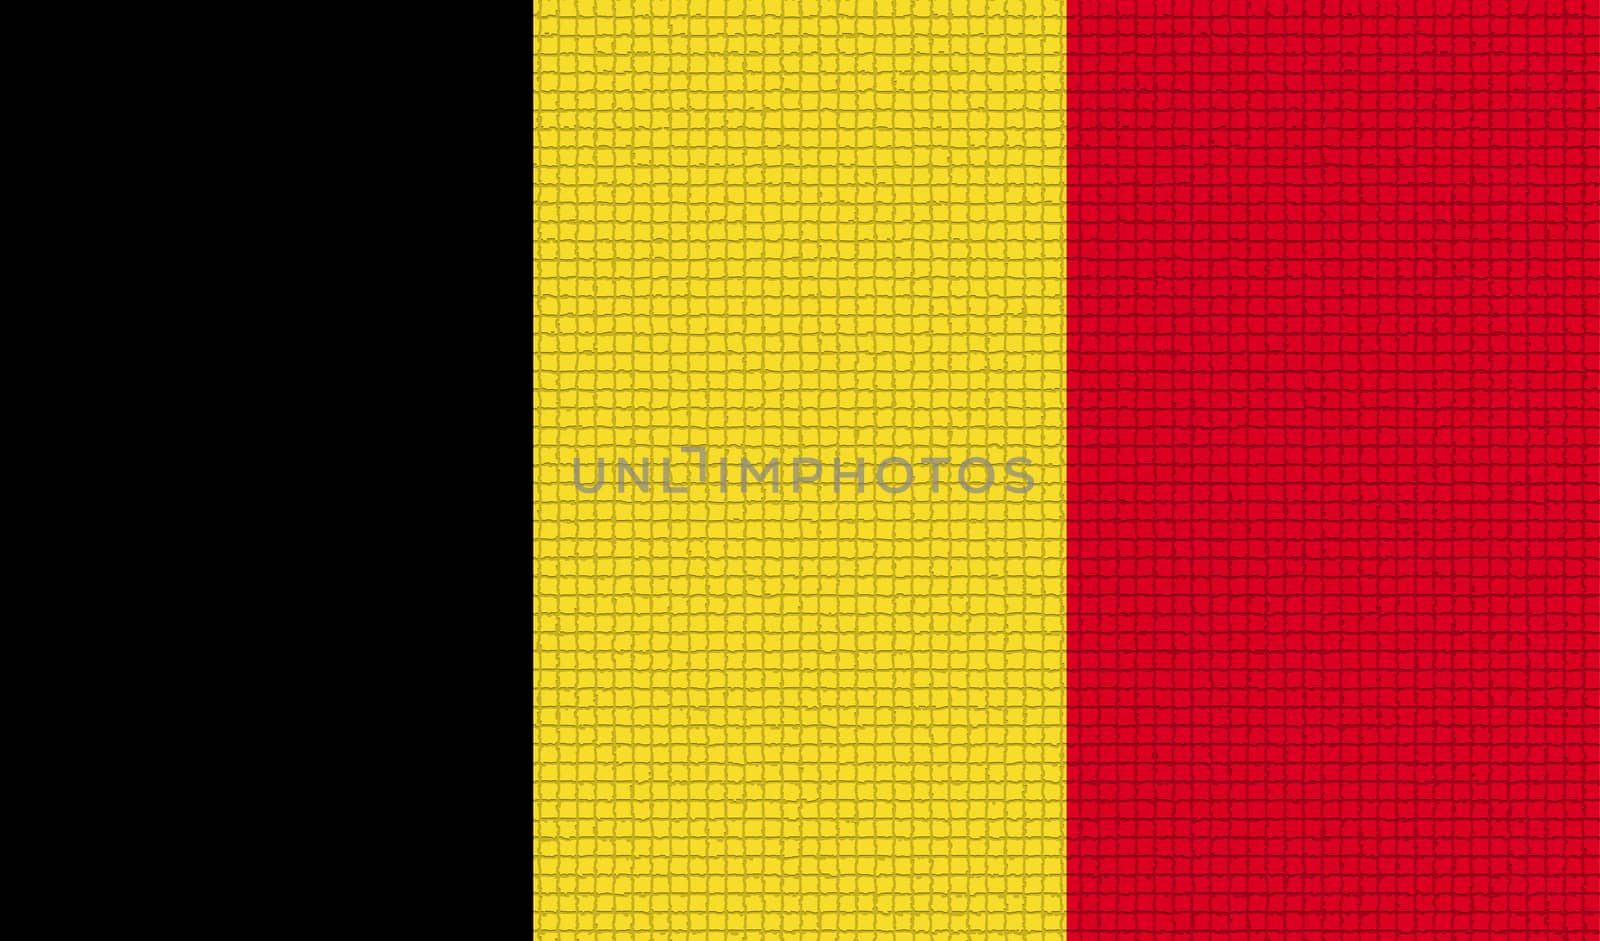 Flags of Belgium with abstract textures. Rasterized version